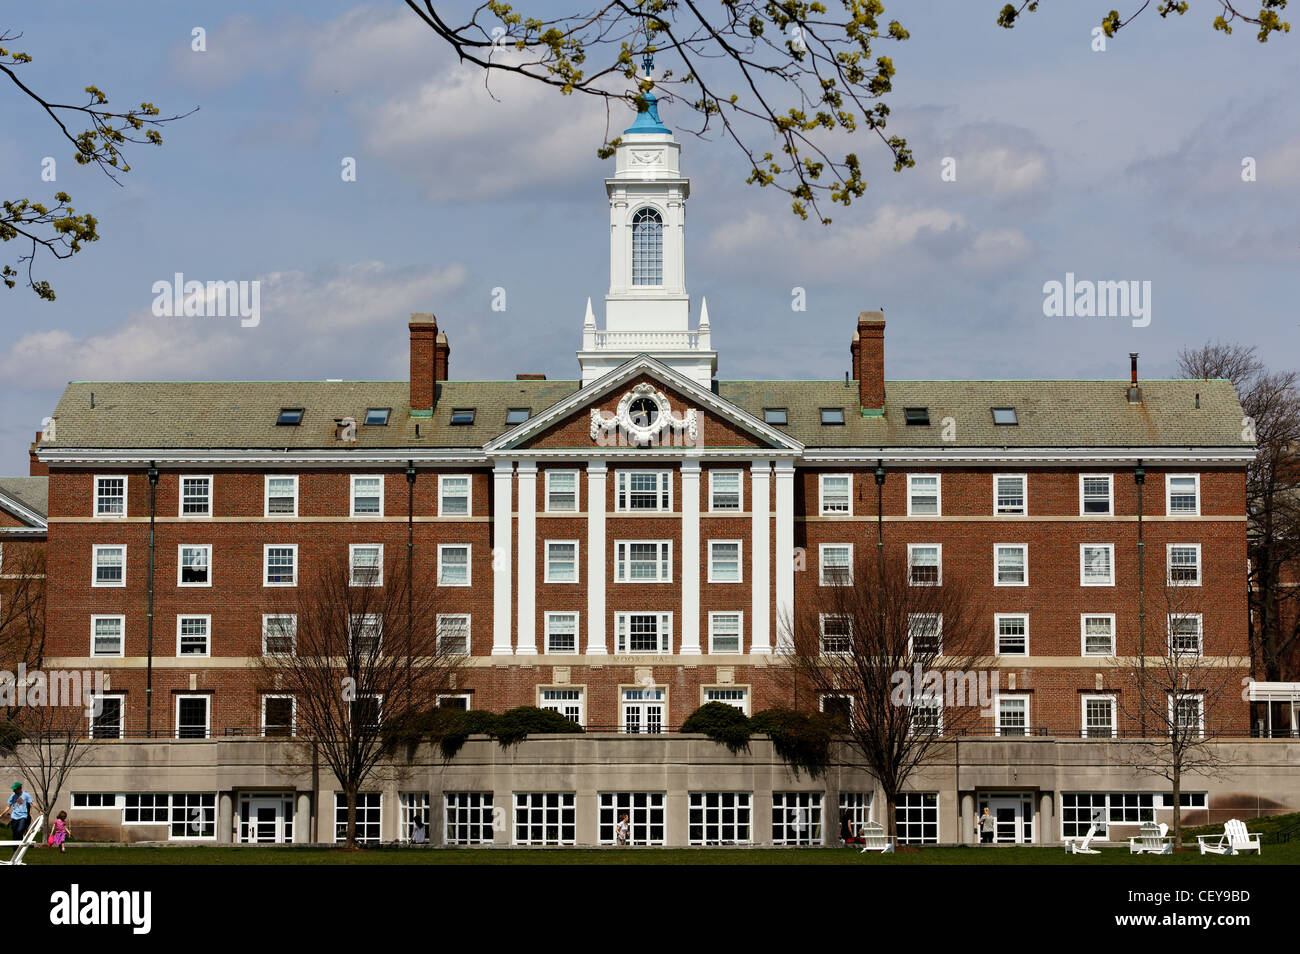 Moors Hall, part of both Cabot and Pforzheimer Houses of Harvard College, at the Radcliffe Quadrangle in Cambridge, MA. Stock Photo